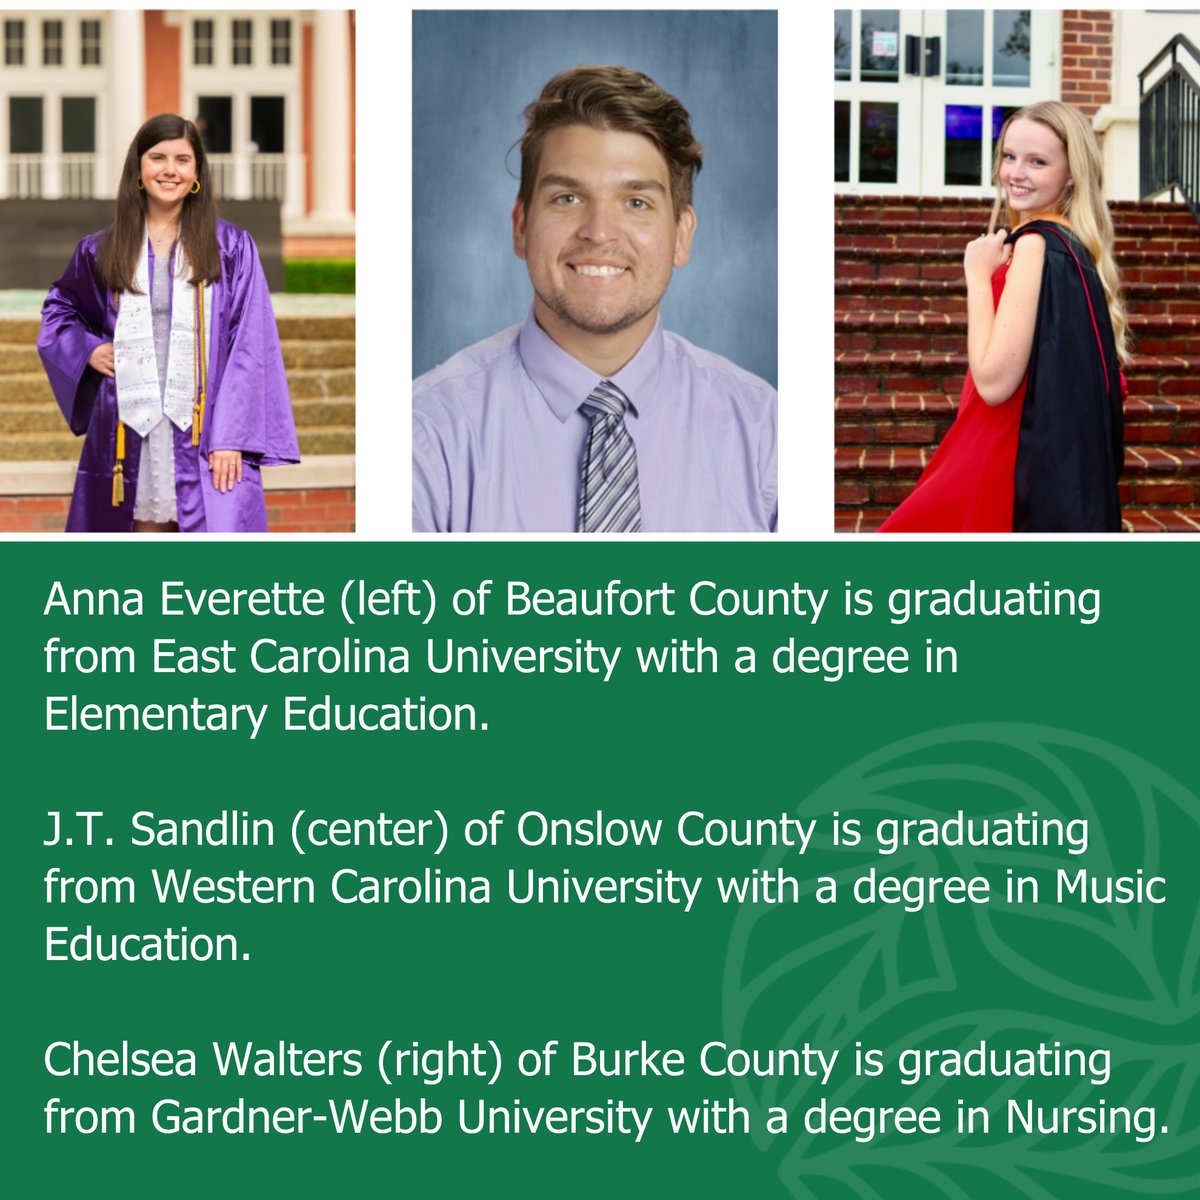 Excited to celebrate the achievements of our 168 Golden LEAF #Scholar graduates from N.C. colleges & universities! Discover how Anna Everette, JT Sandlin & Chelsea Walters are planning to make a difference in #rural communities post-graduation. #workforce goldenleaf.org/news/golden-le…